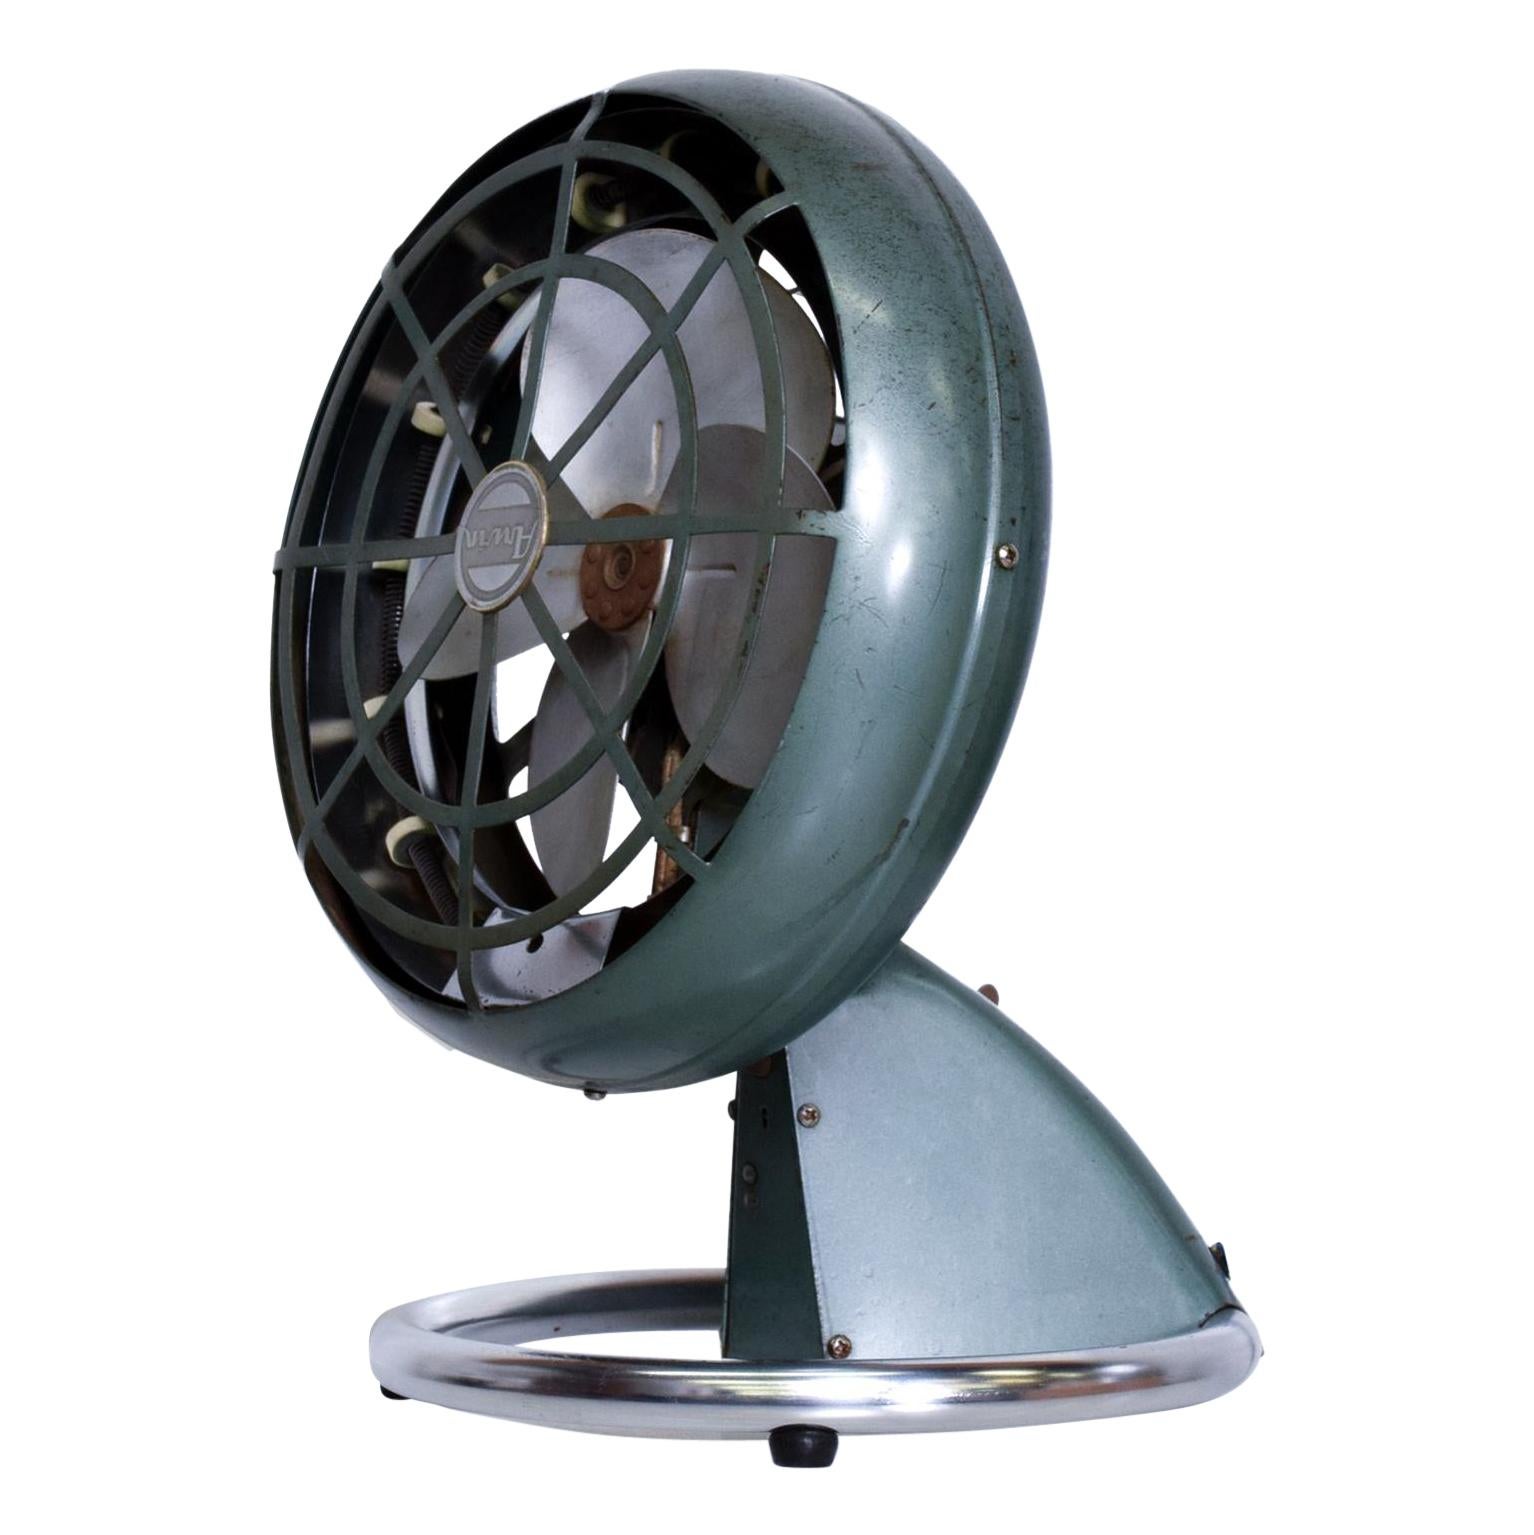 1940s Art Deco Modern Industrial Electric Fan, Collector's Item by ARVIN